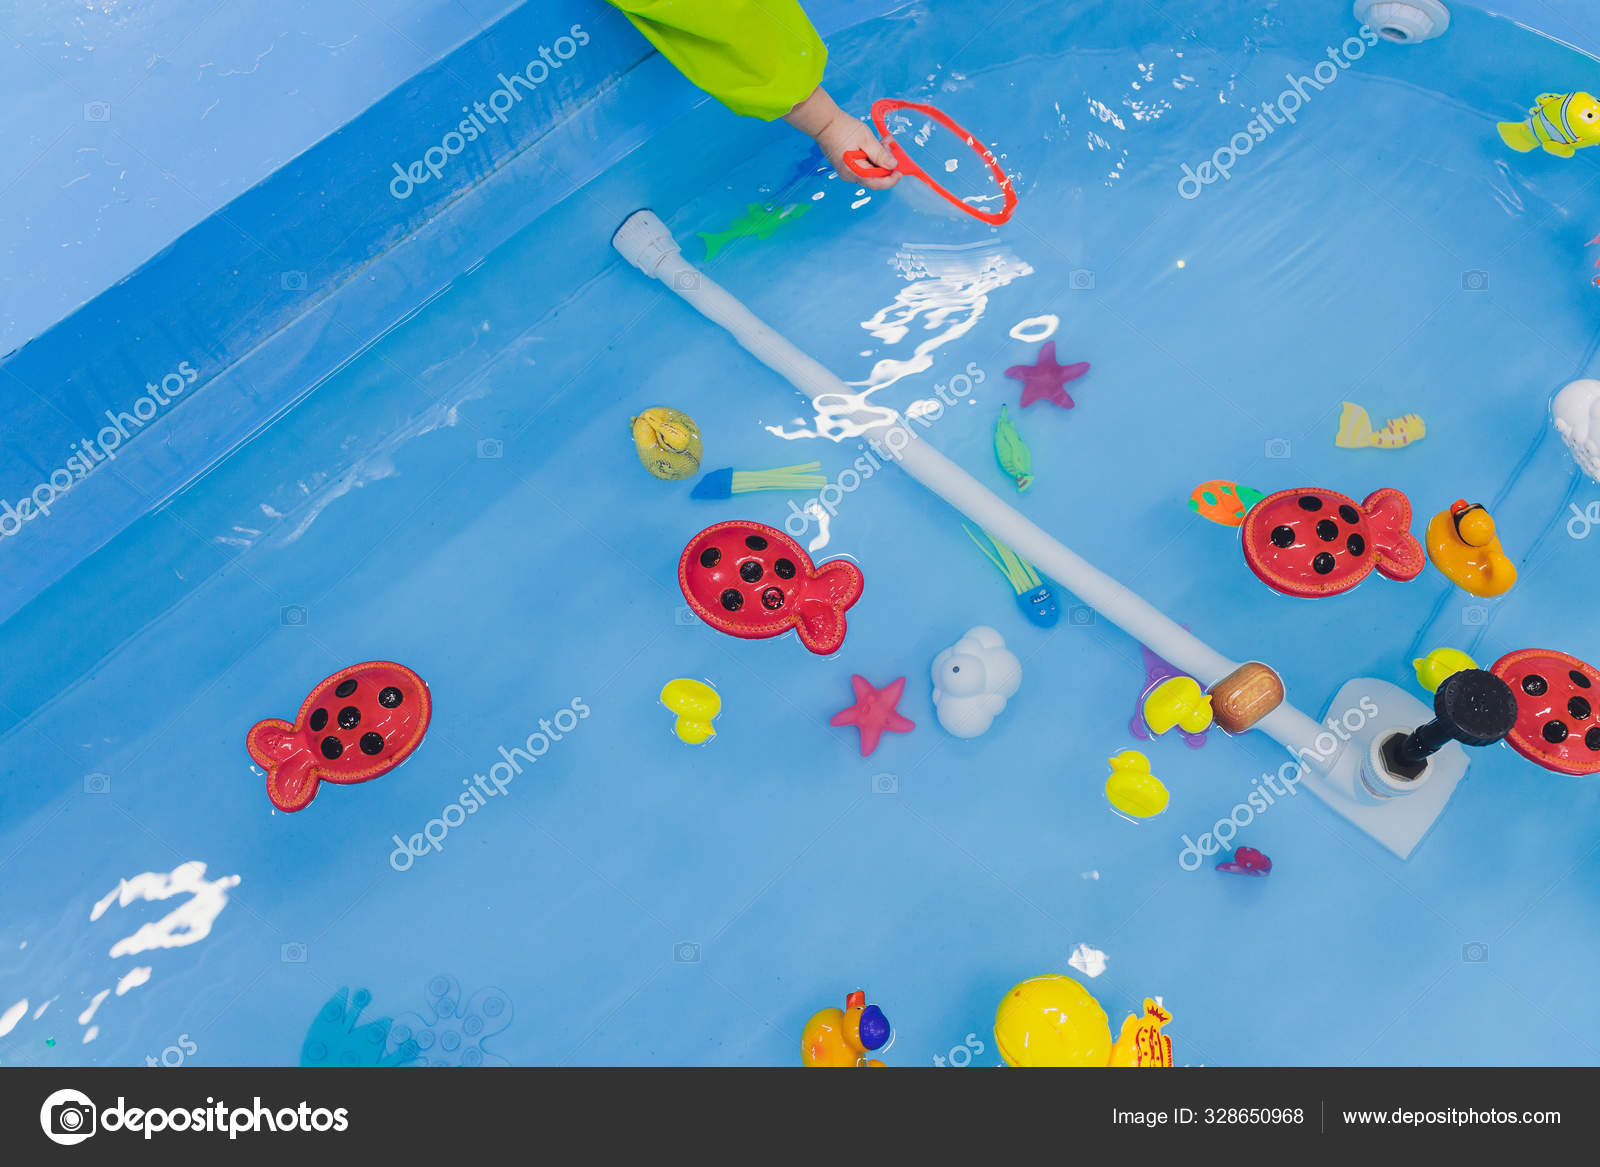 Fishing in the paddling pool. Childrens toys in the pool. Toy fish